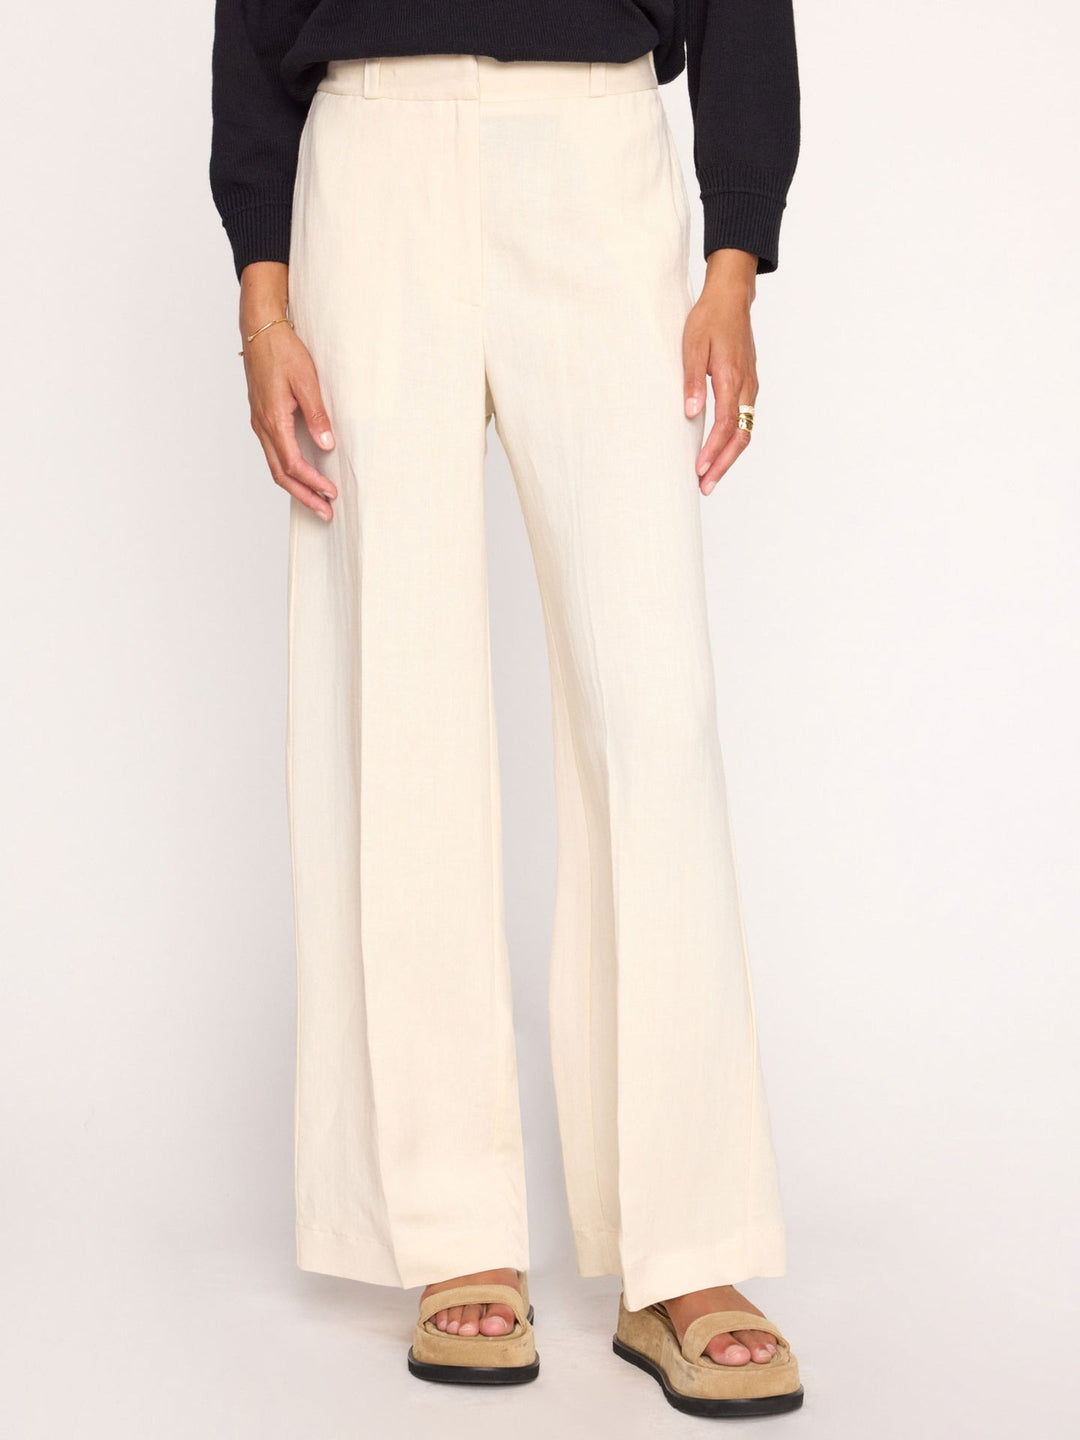 Areo Pant in Egret